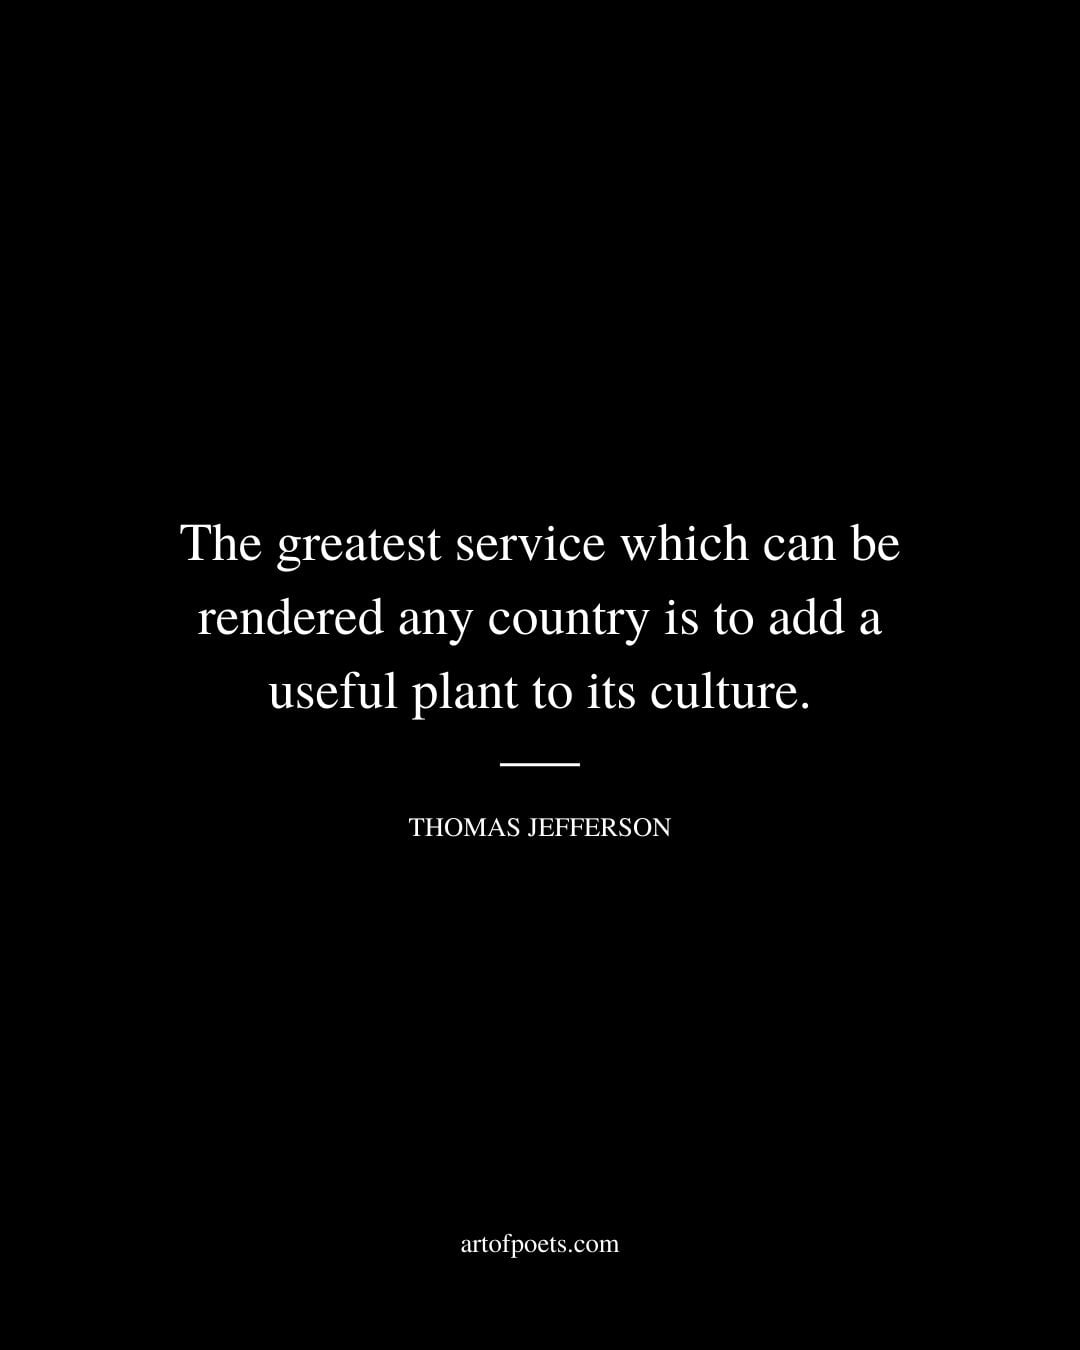 The greatest service which can be rendered any country is to add a useful plant to its culture. – Thomas Jefferson